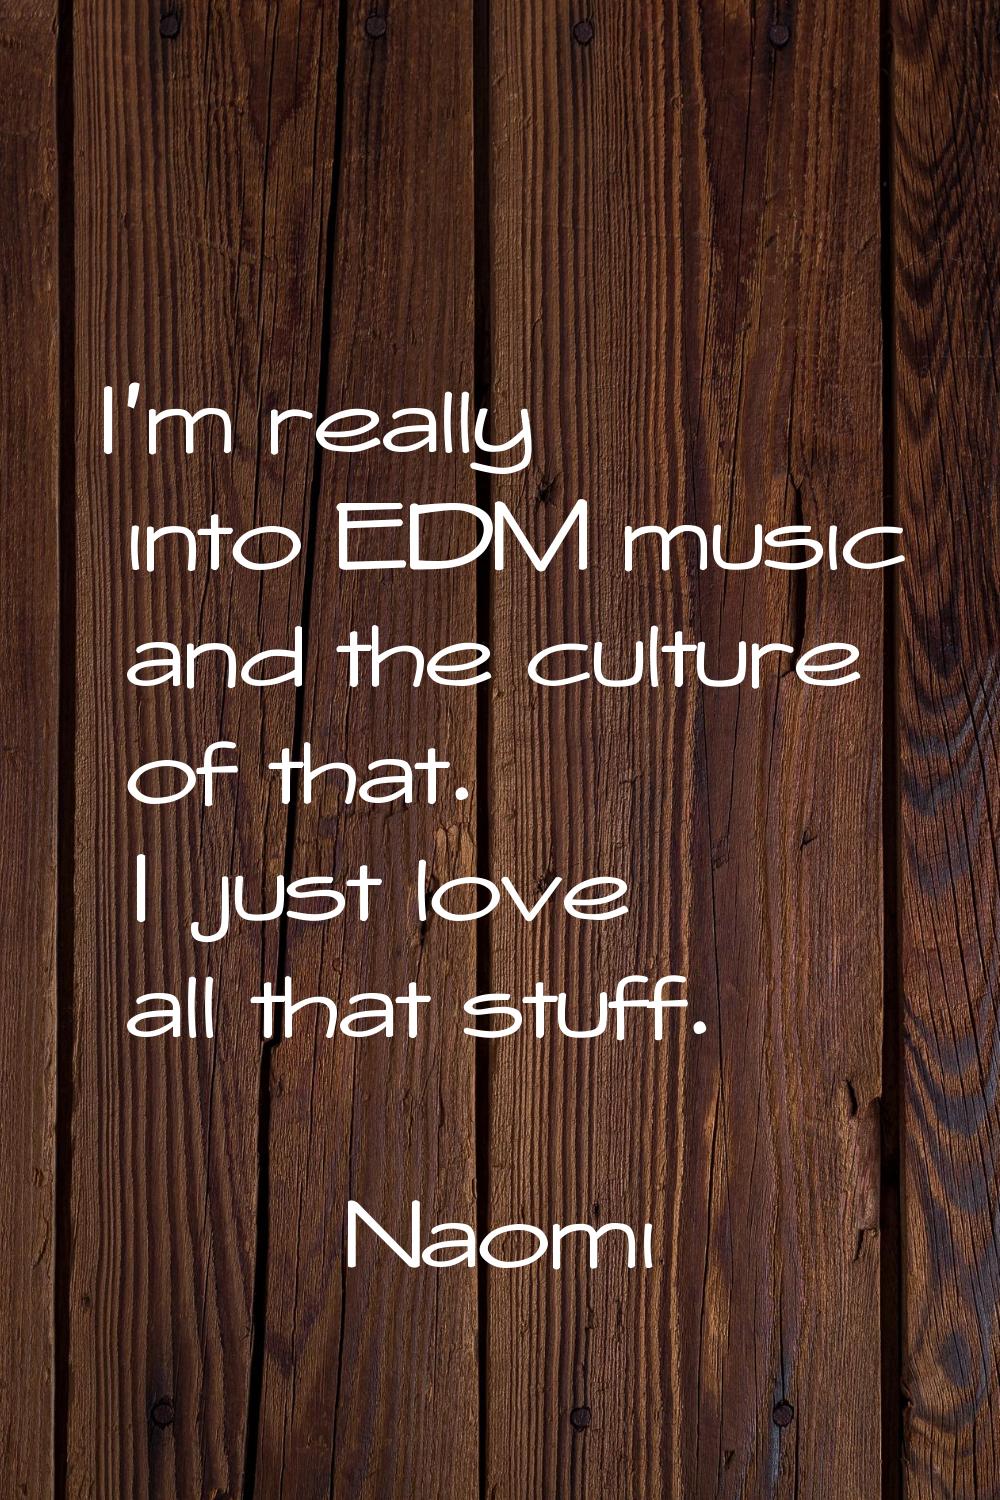 I'm really into EDM music and the culture of that. I just love all that stuff.